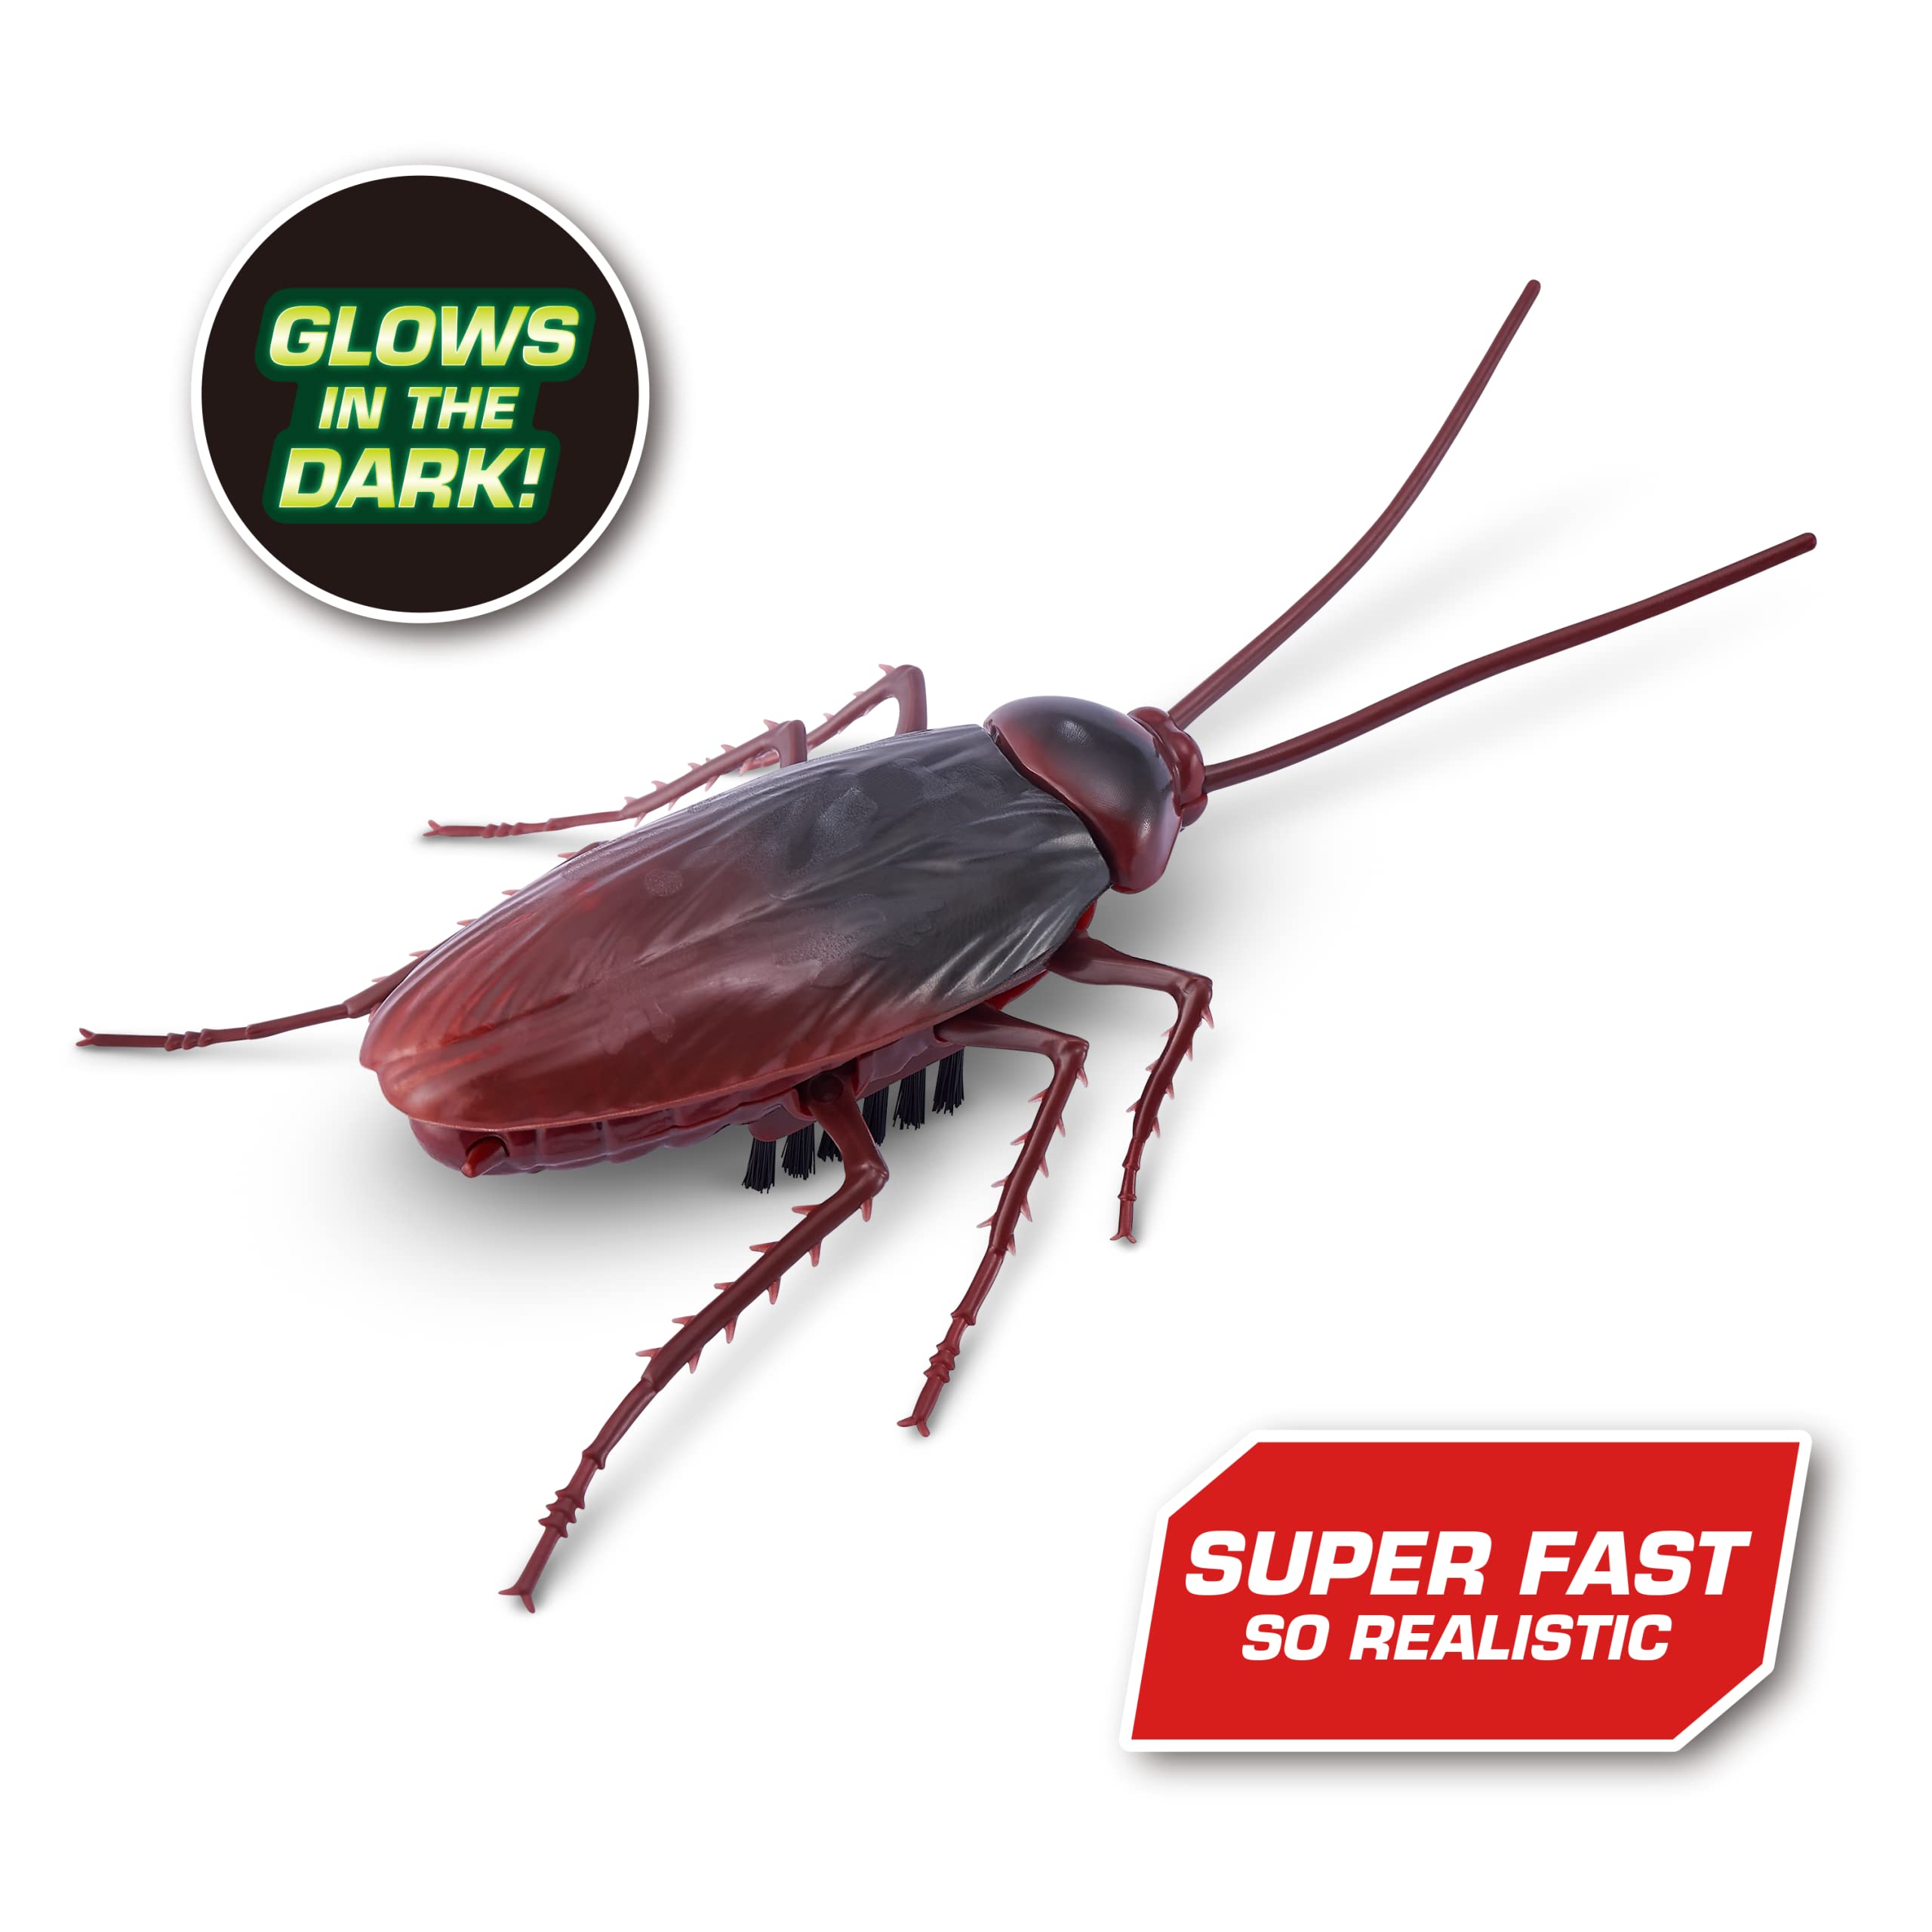 Zuru 38506 ROBO Alive Crawling Cockroach Series 2, Assorted Designs and Colours